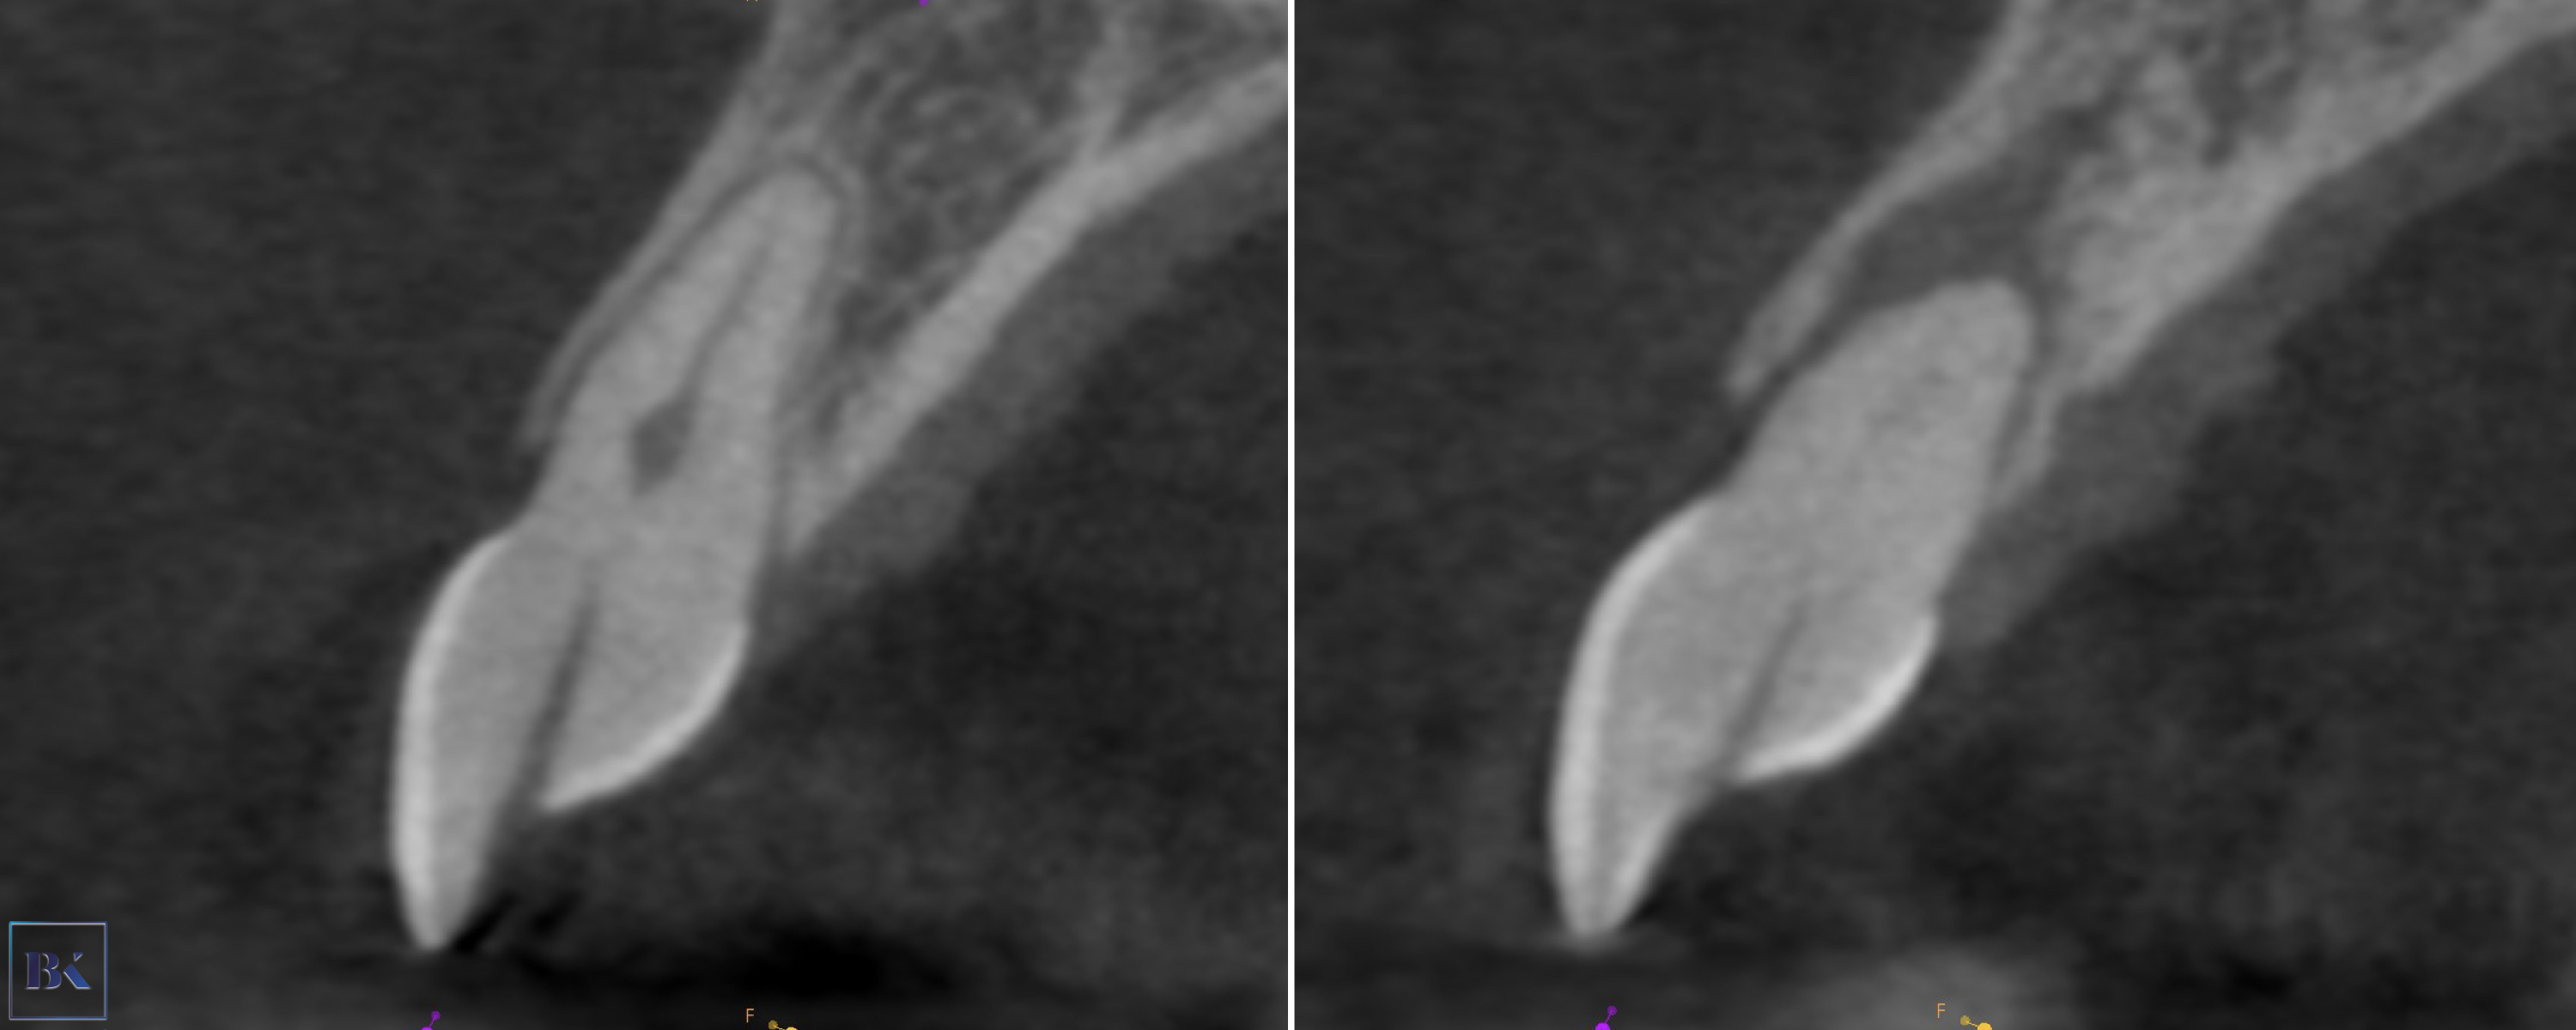 Figs. 18a & b: CBCT check, sagittal plane. The axis of the access cavity was visible for both teeth.